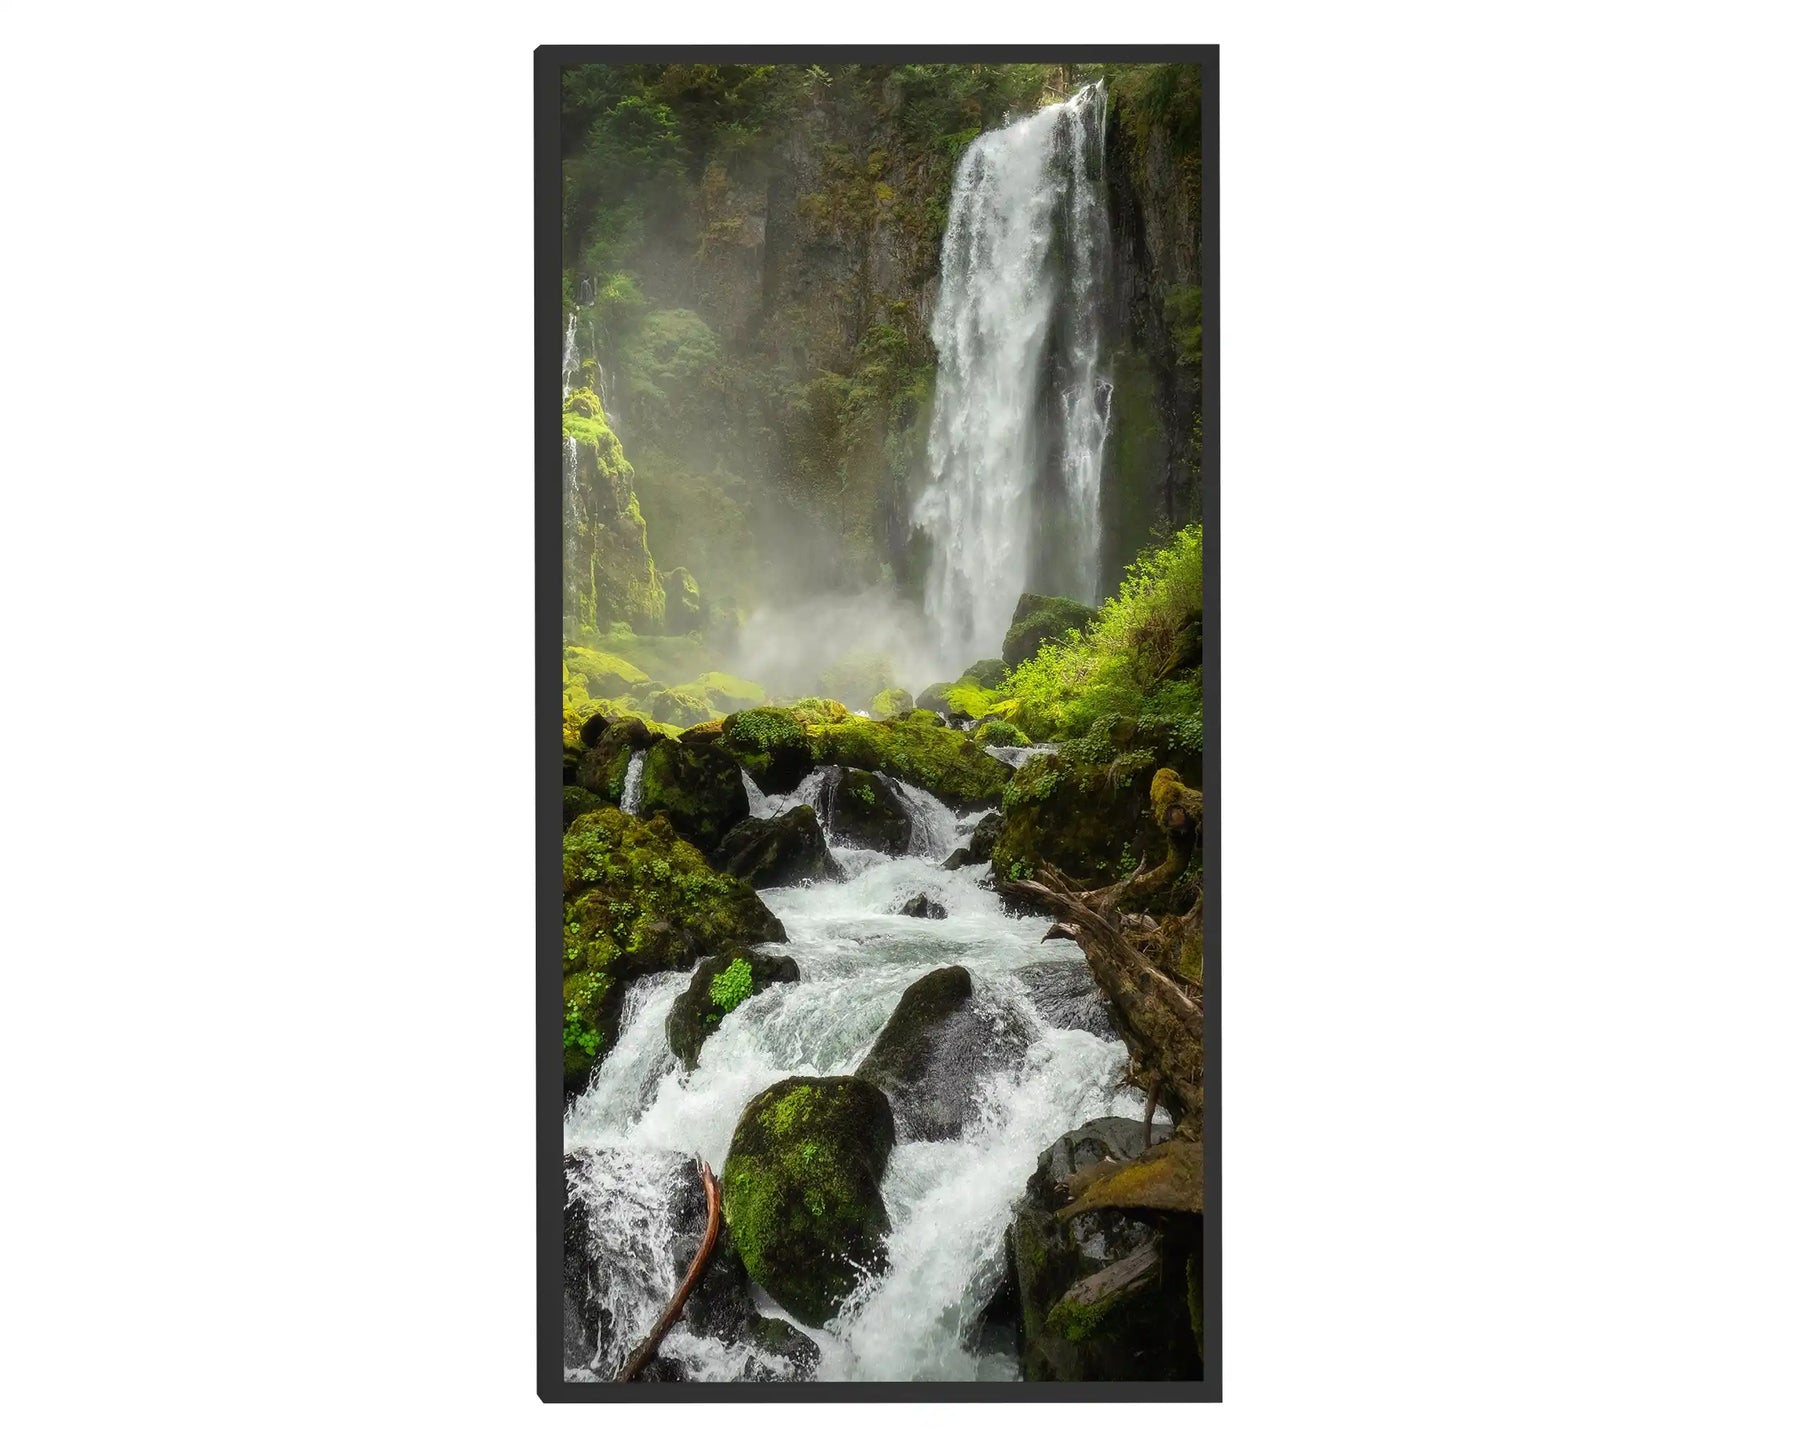 600w Picture IR Panel - Waterfall